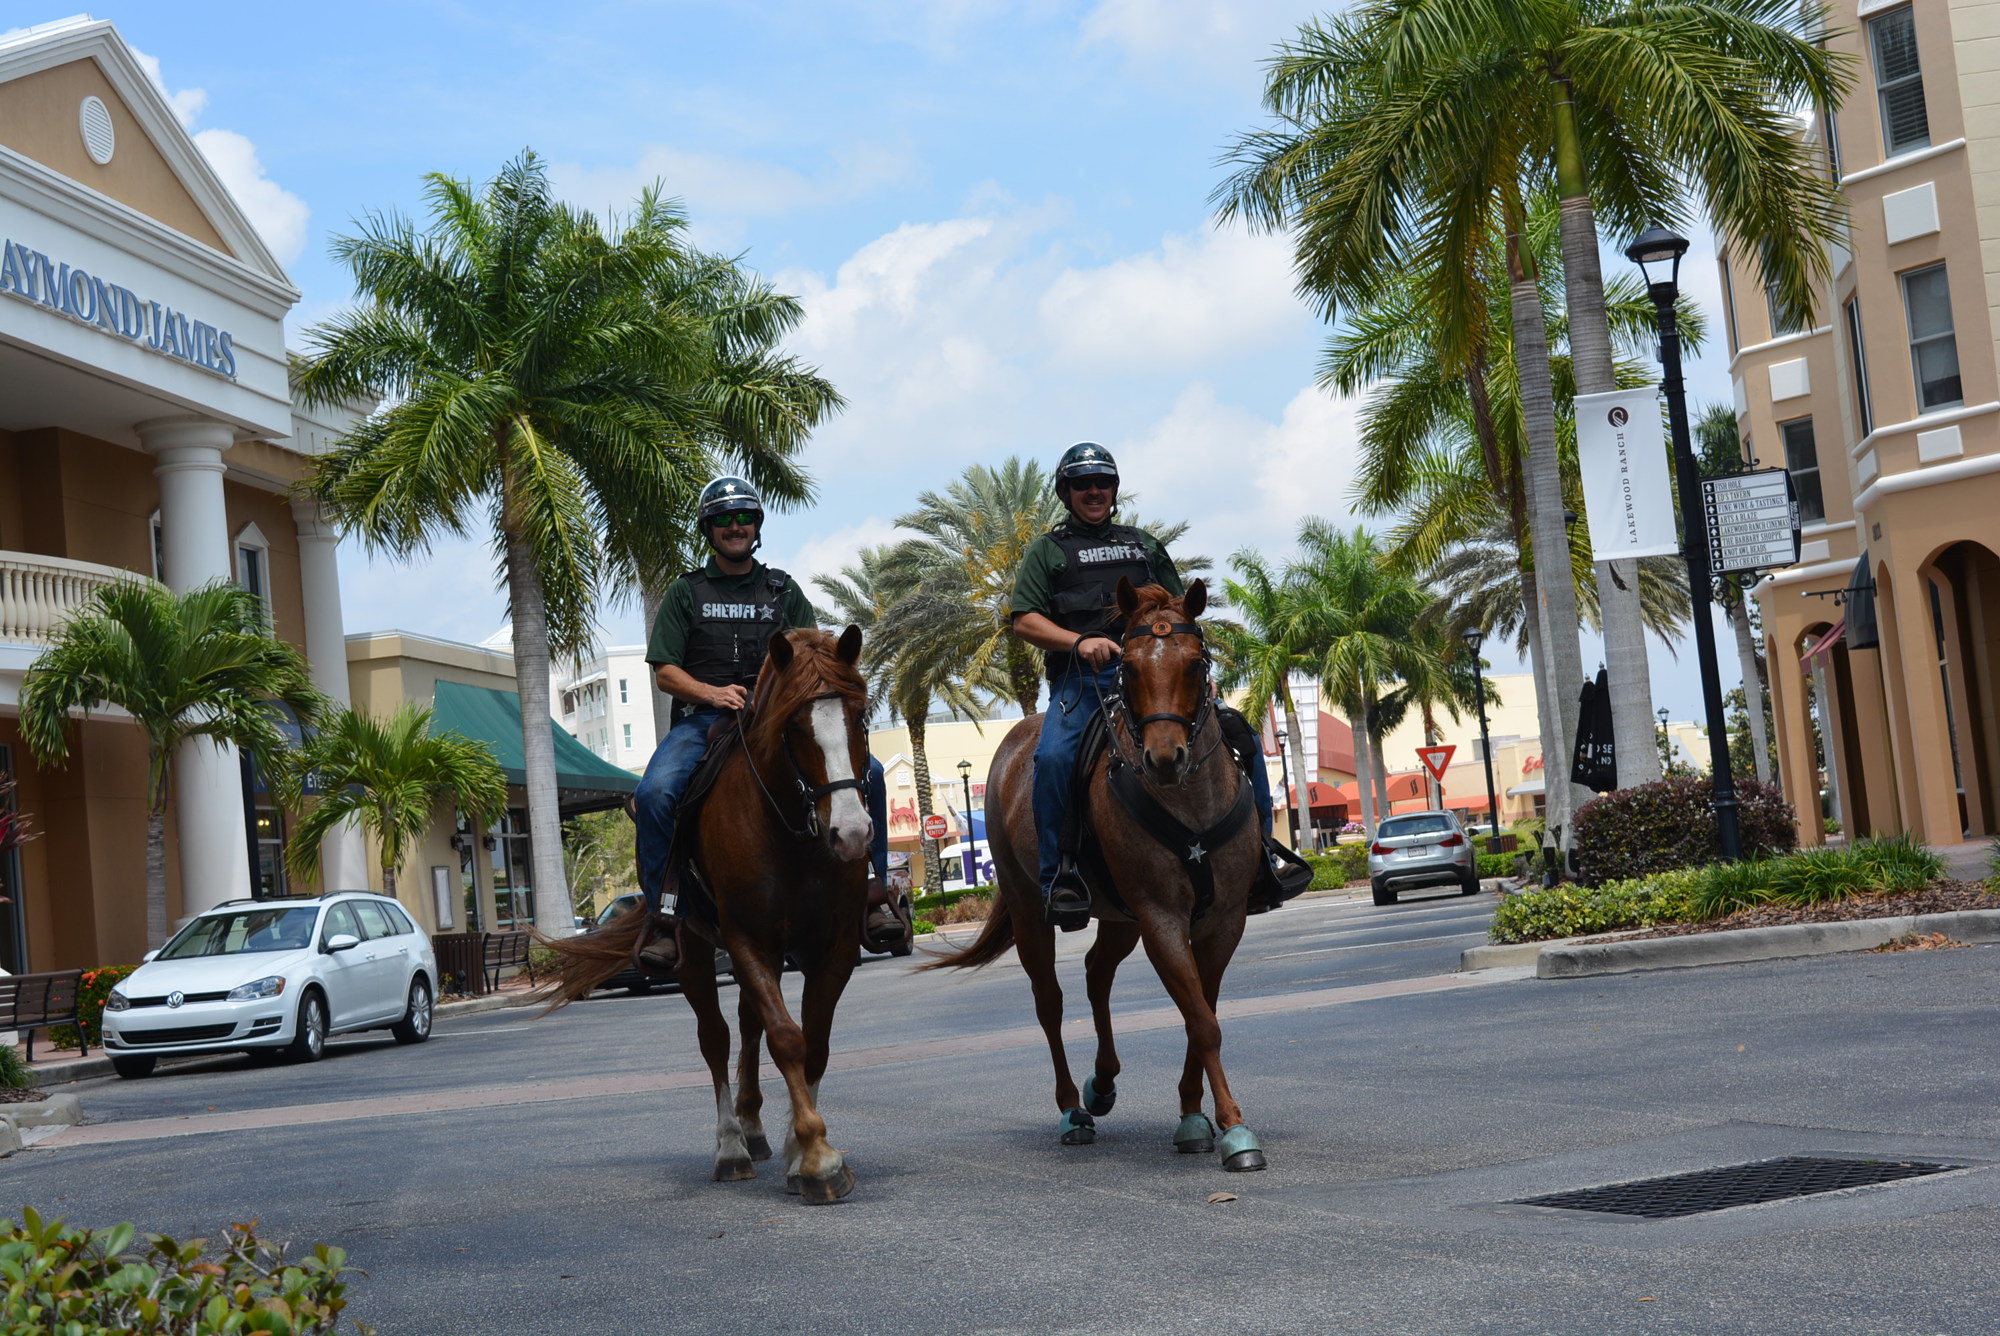 Manatee County Sheriff's Office deputies Zach Bradley and Kevin Vreeland ride their horses, Jaxon and Gunny, respectively, through Main Street at Lakewood Ranch. Getting the horses working in new environments is important training